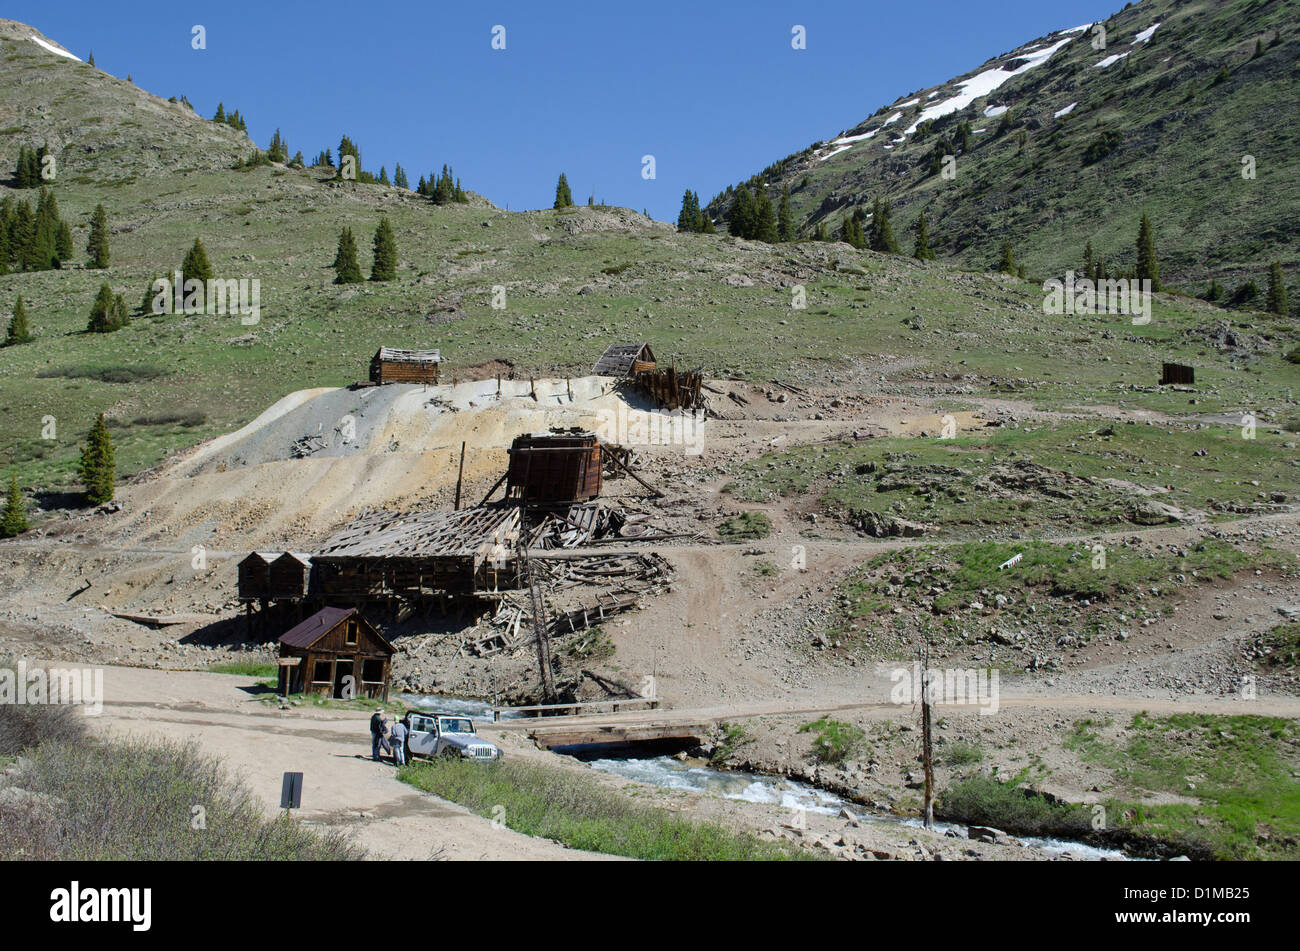 Engineer pass jeep tour goes to 12,500 ft elevation between Silverton and and Lake City Colorado in the San Juan Mountains Stock Photo